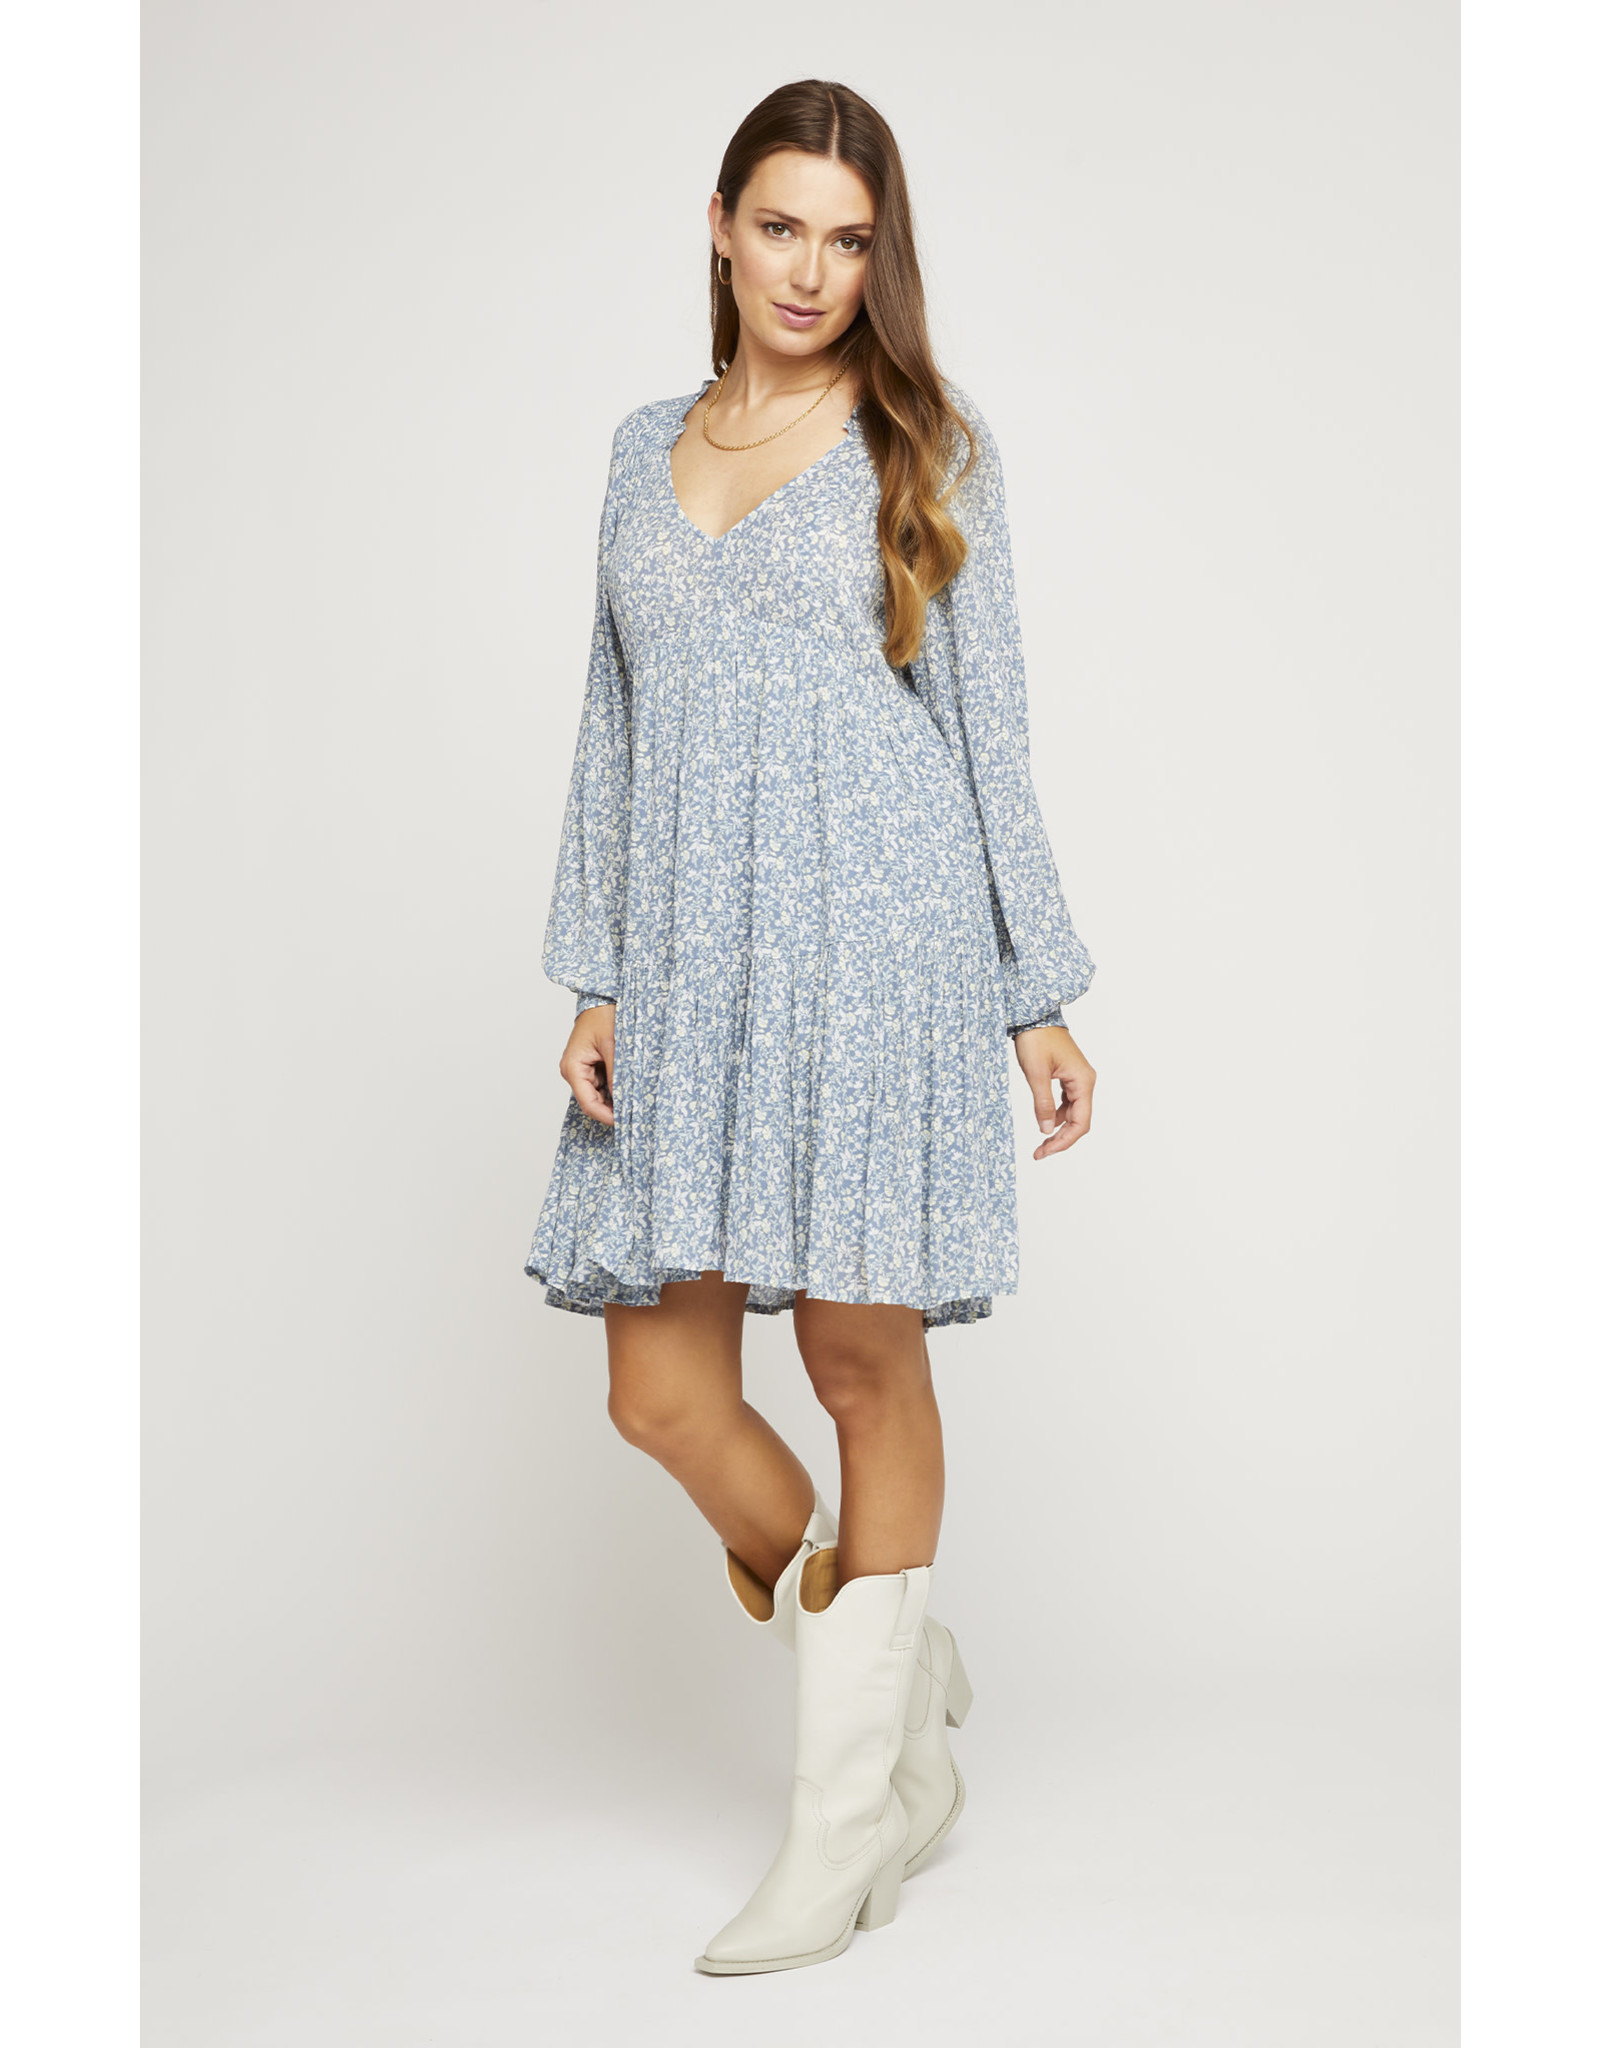 BGS Gentle Fawn - Pacific Dress / Blue